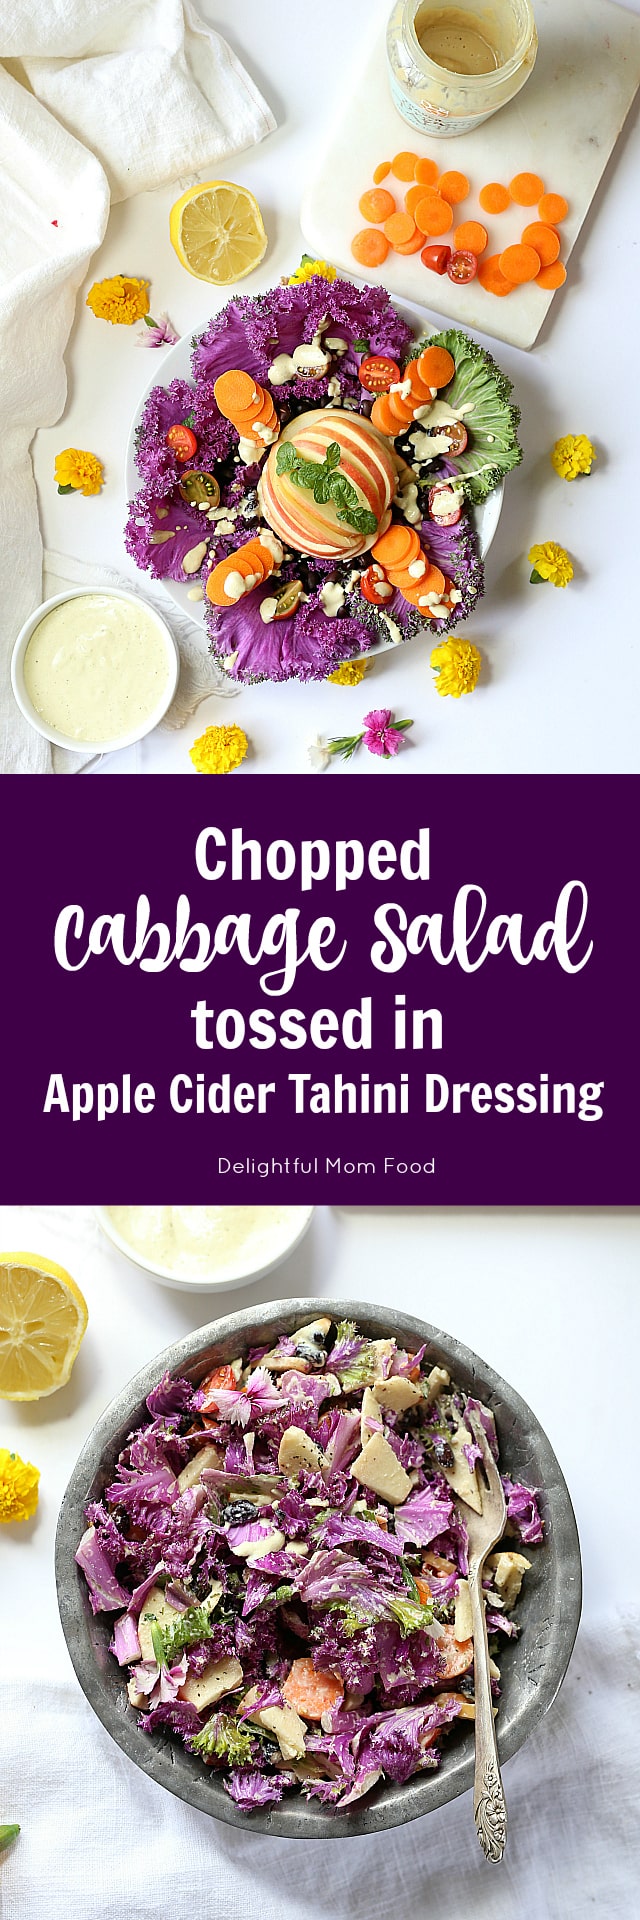 Savoy purple cabbage beautifully chopped and dressed in an apple cider tahini dressing. This salad has all the digestive gut-healing properties you need to start off the month!